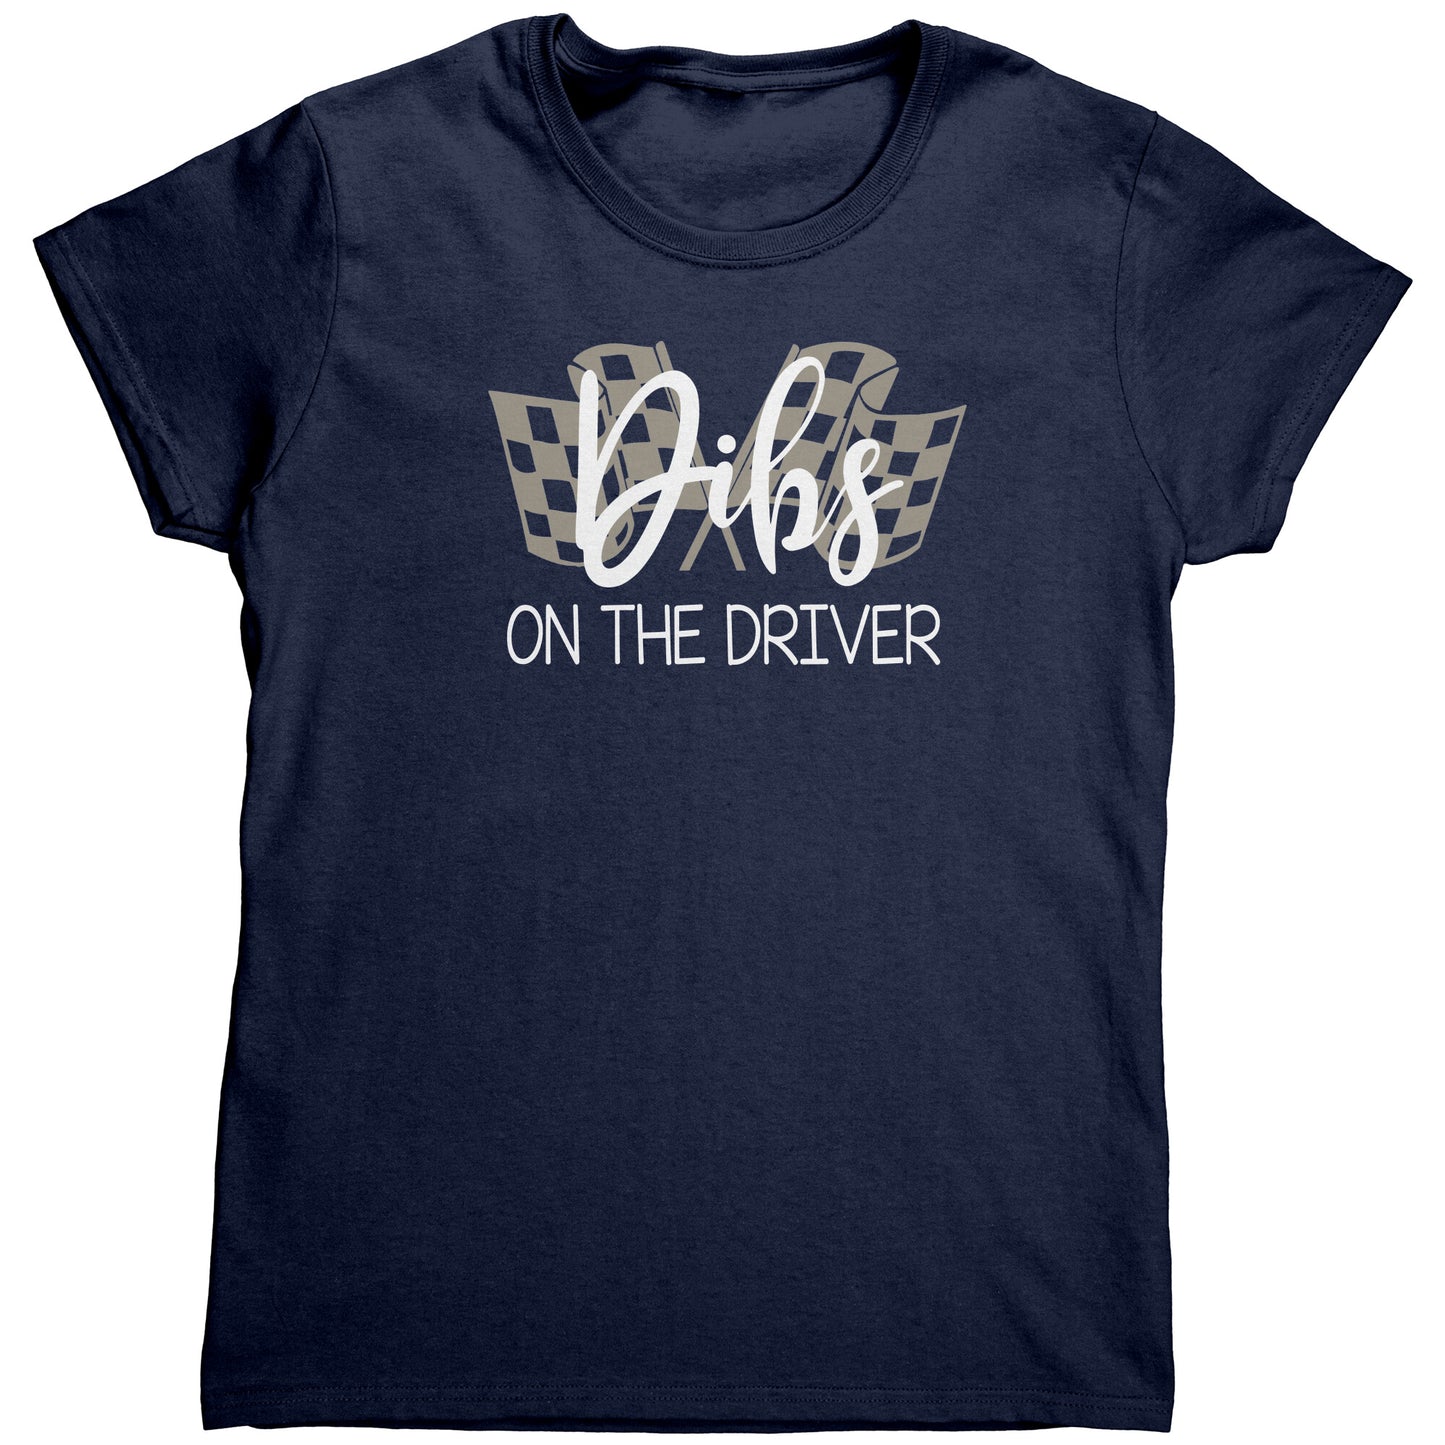 Dibs On The Driver Women's T-Shirt